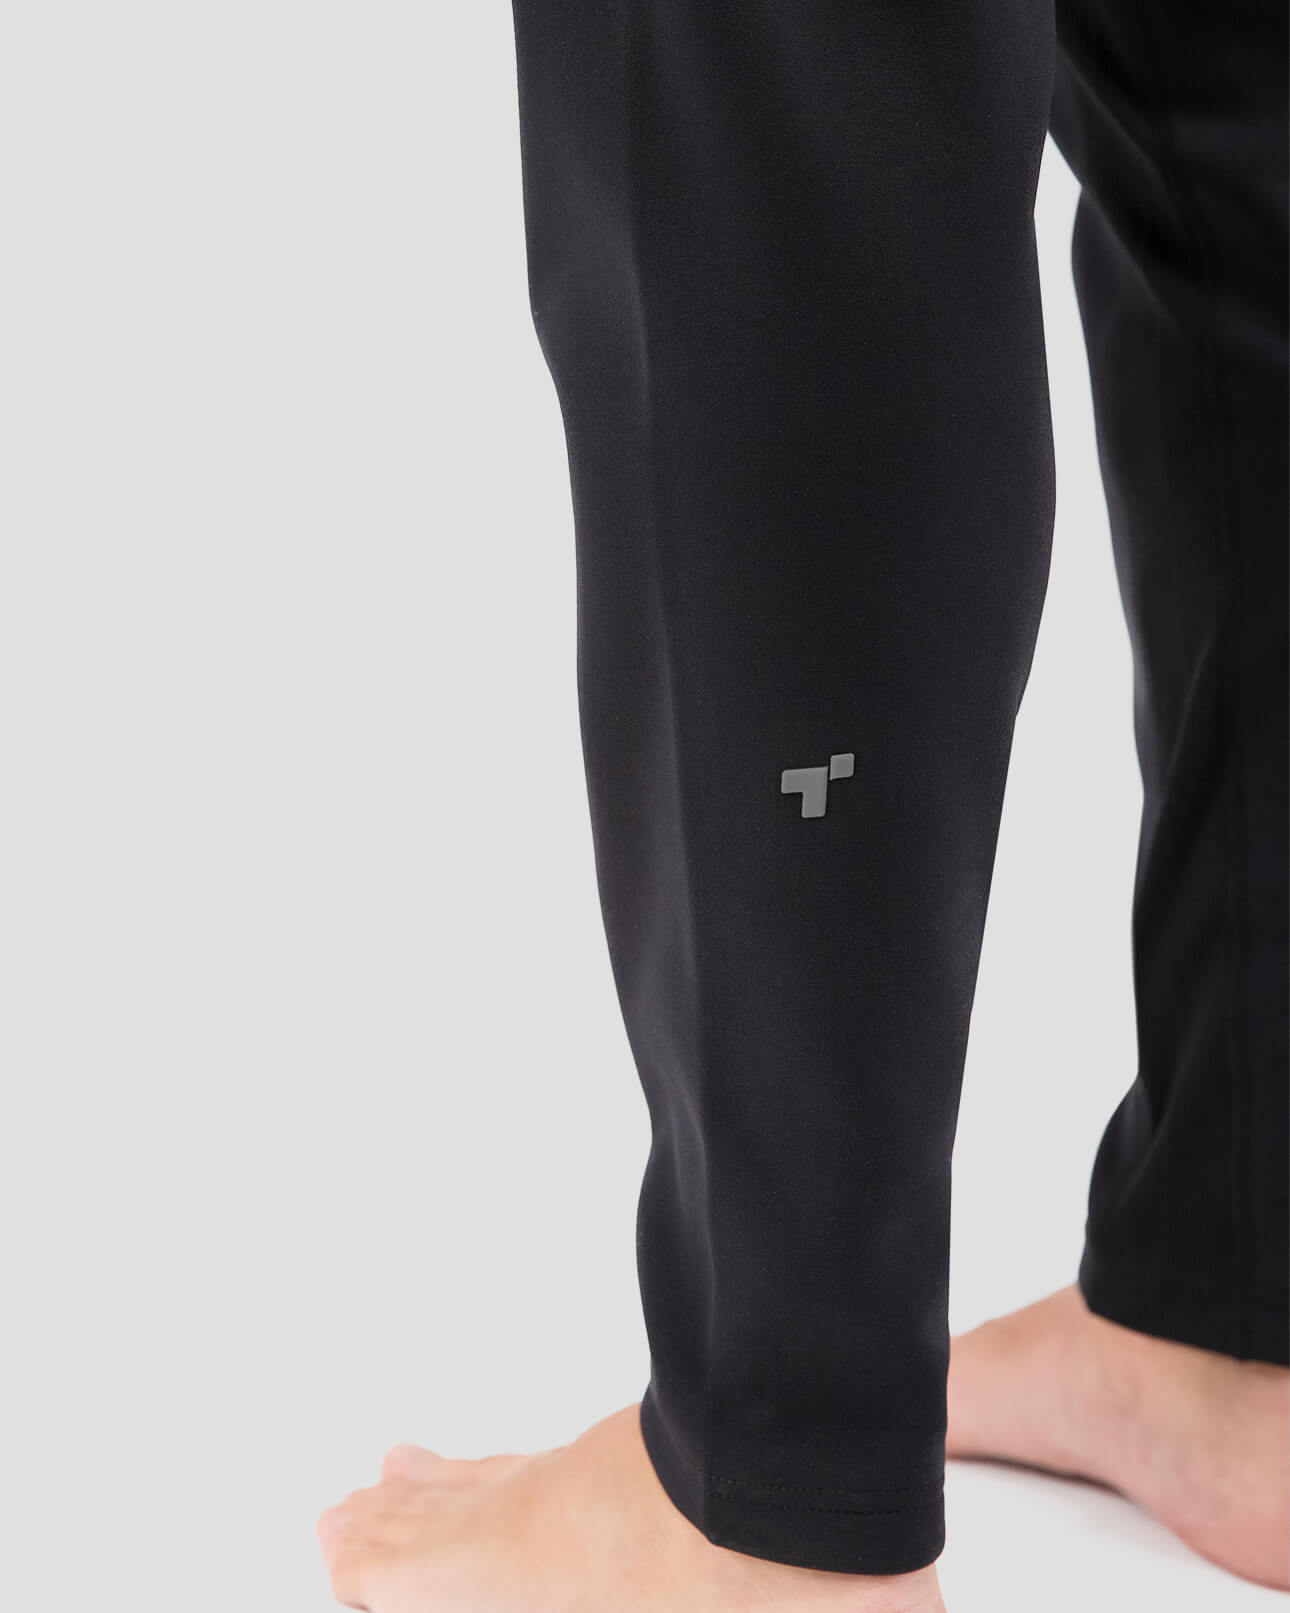 Men's Beast Expedition Weight Performance Thermal Pants | Color: Black